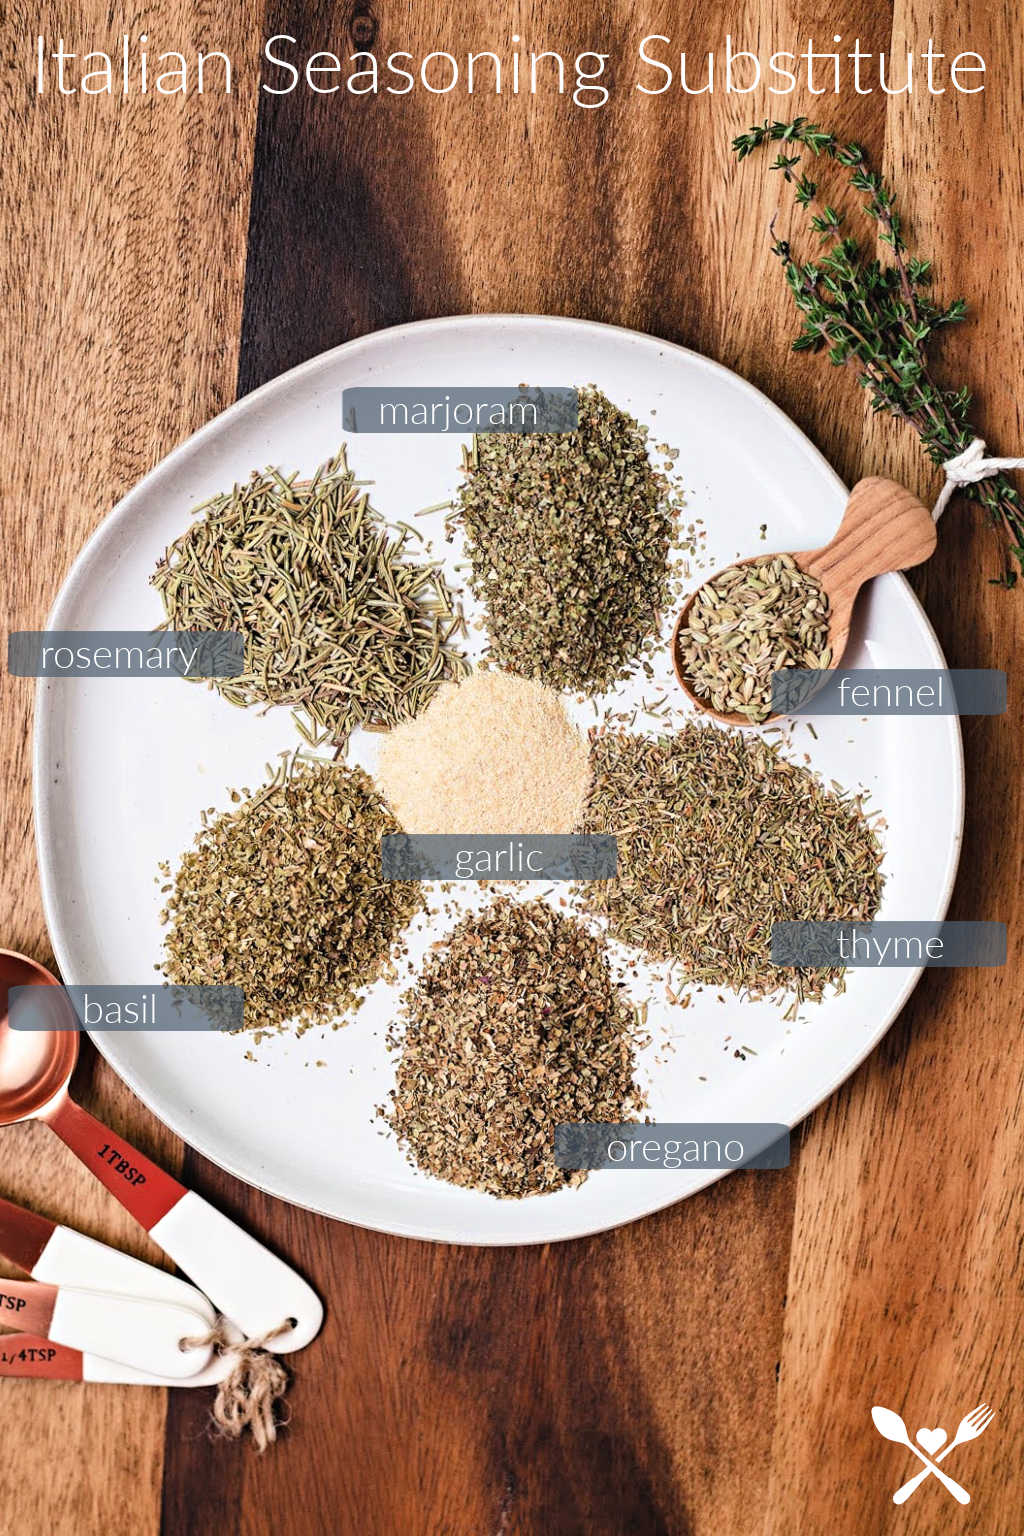 spices for italian seasoning substitute on a white plate on a wooden table.